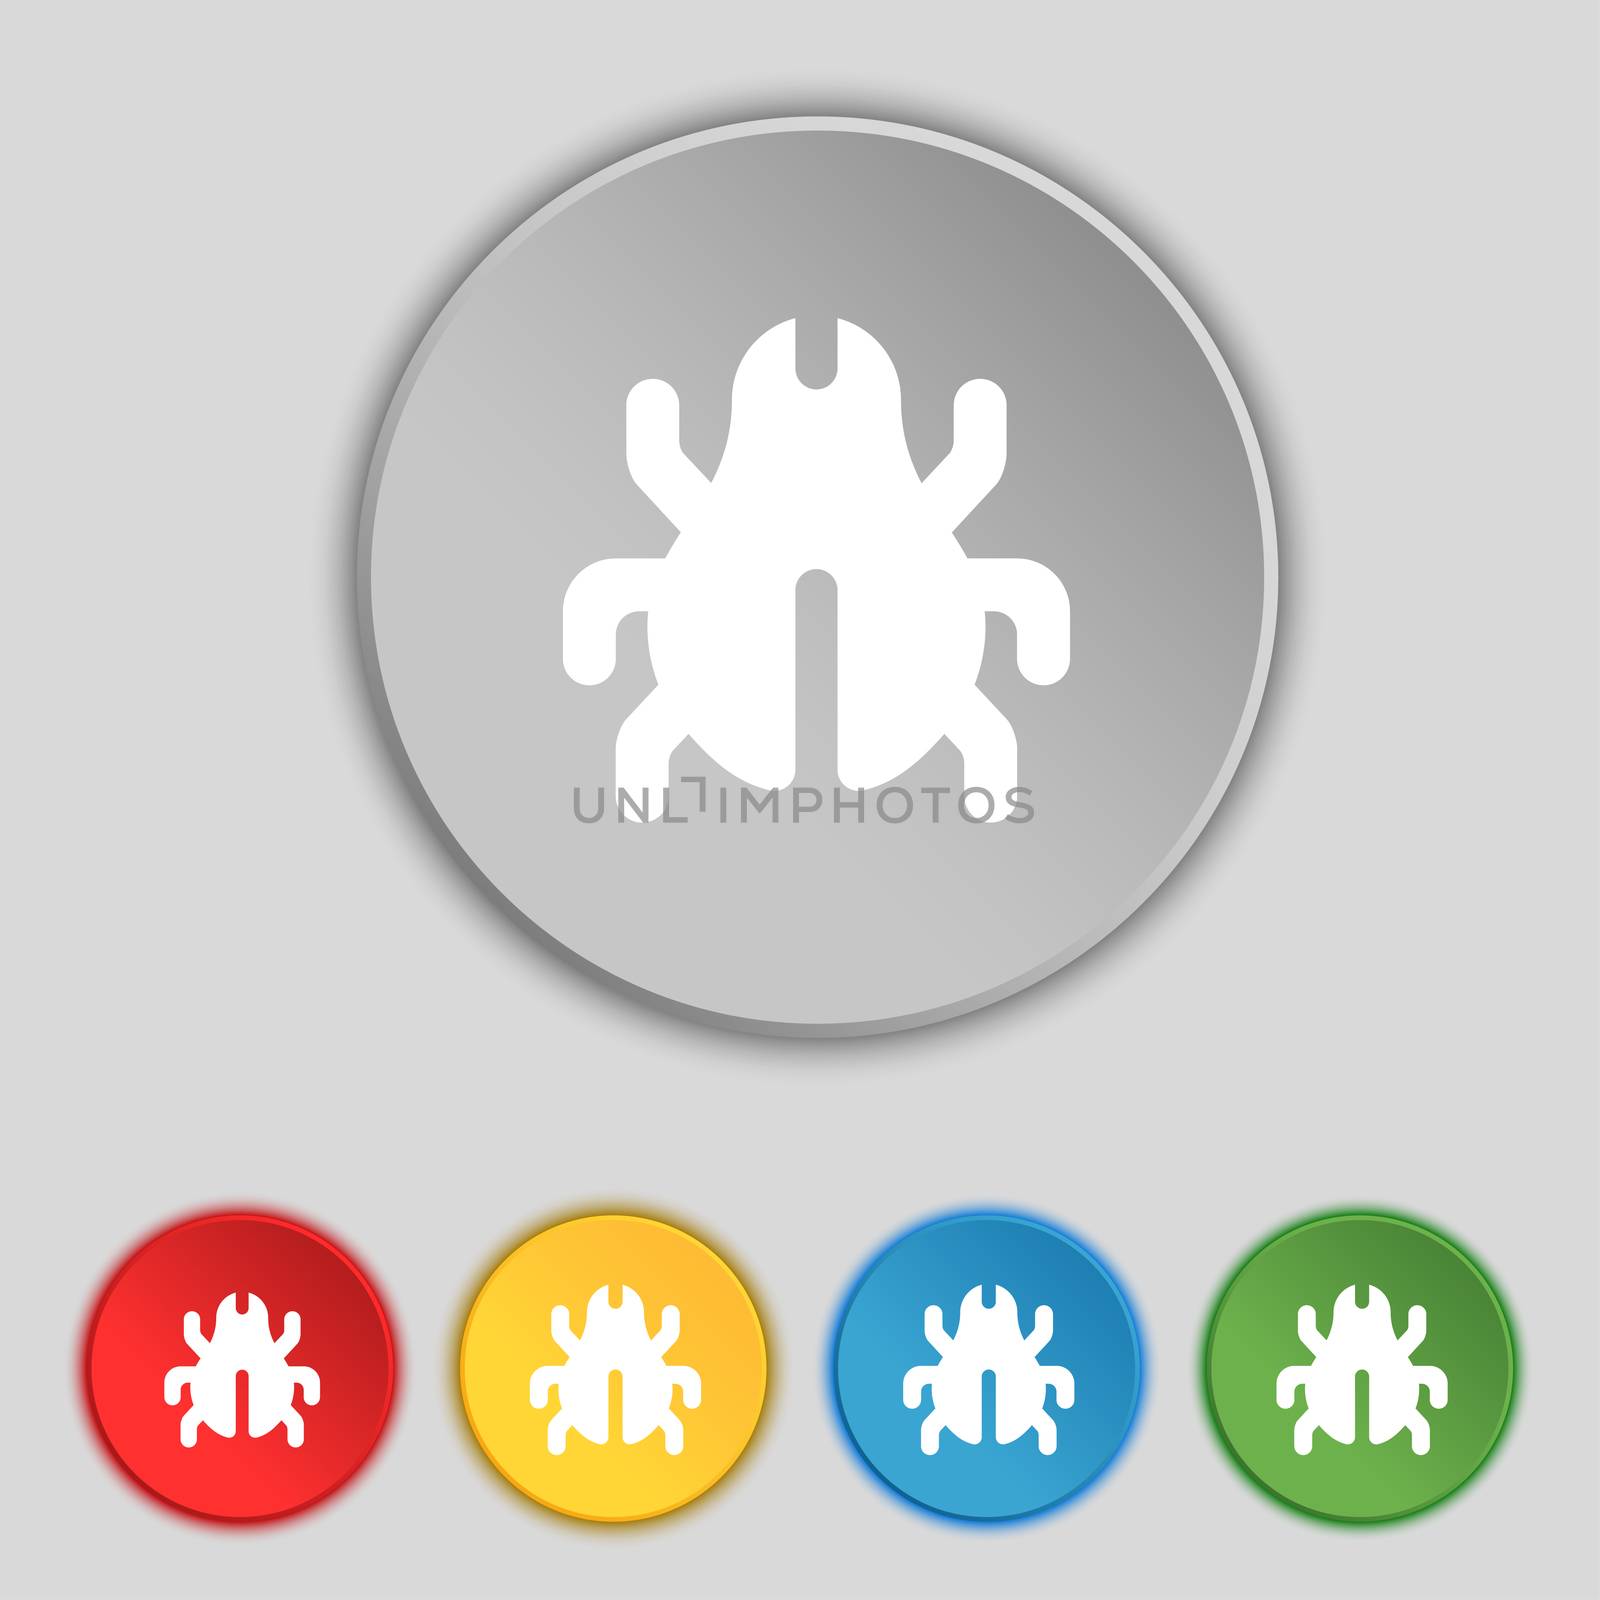 Software Bug, Virus, Disinfection, beetle icon sign. Symbol on five flat buttons. illustration